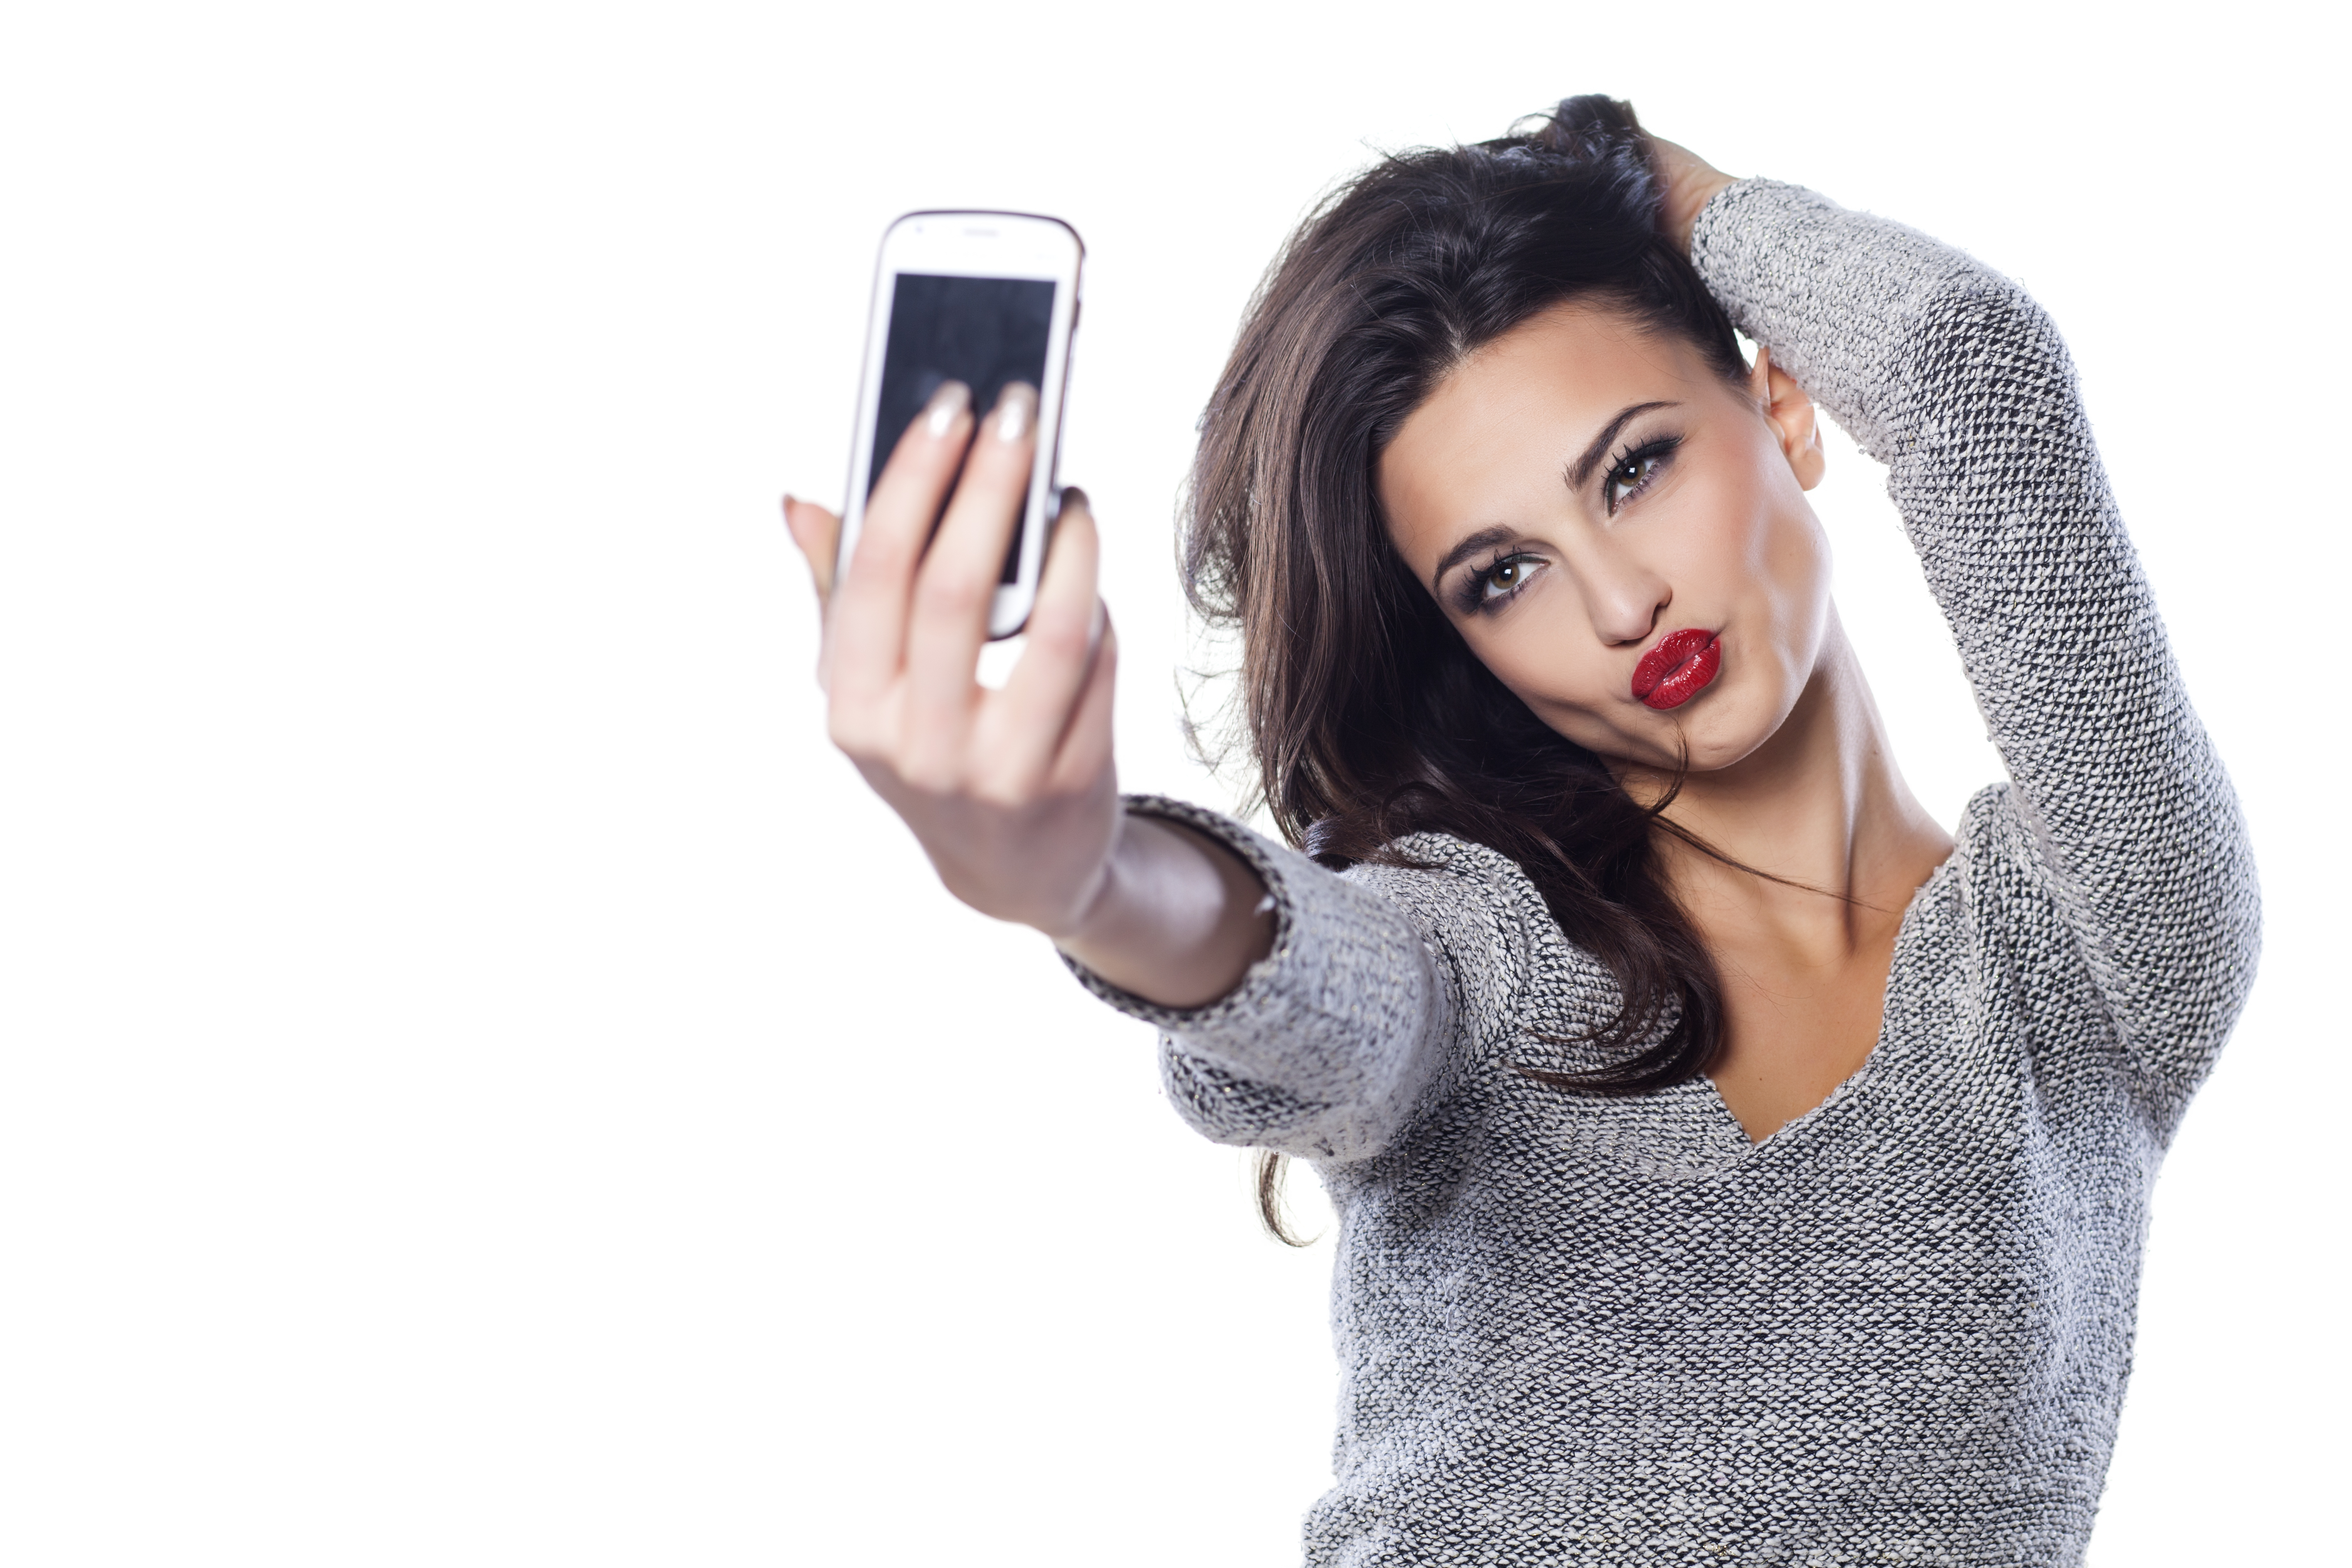 The Selfie Trend Has Caused Serious Behavioral Health Issues ...